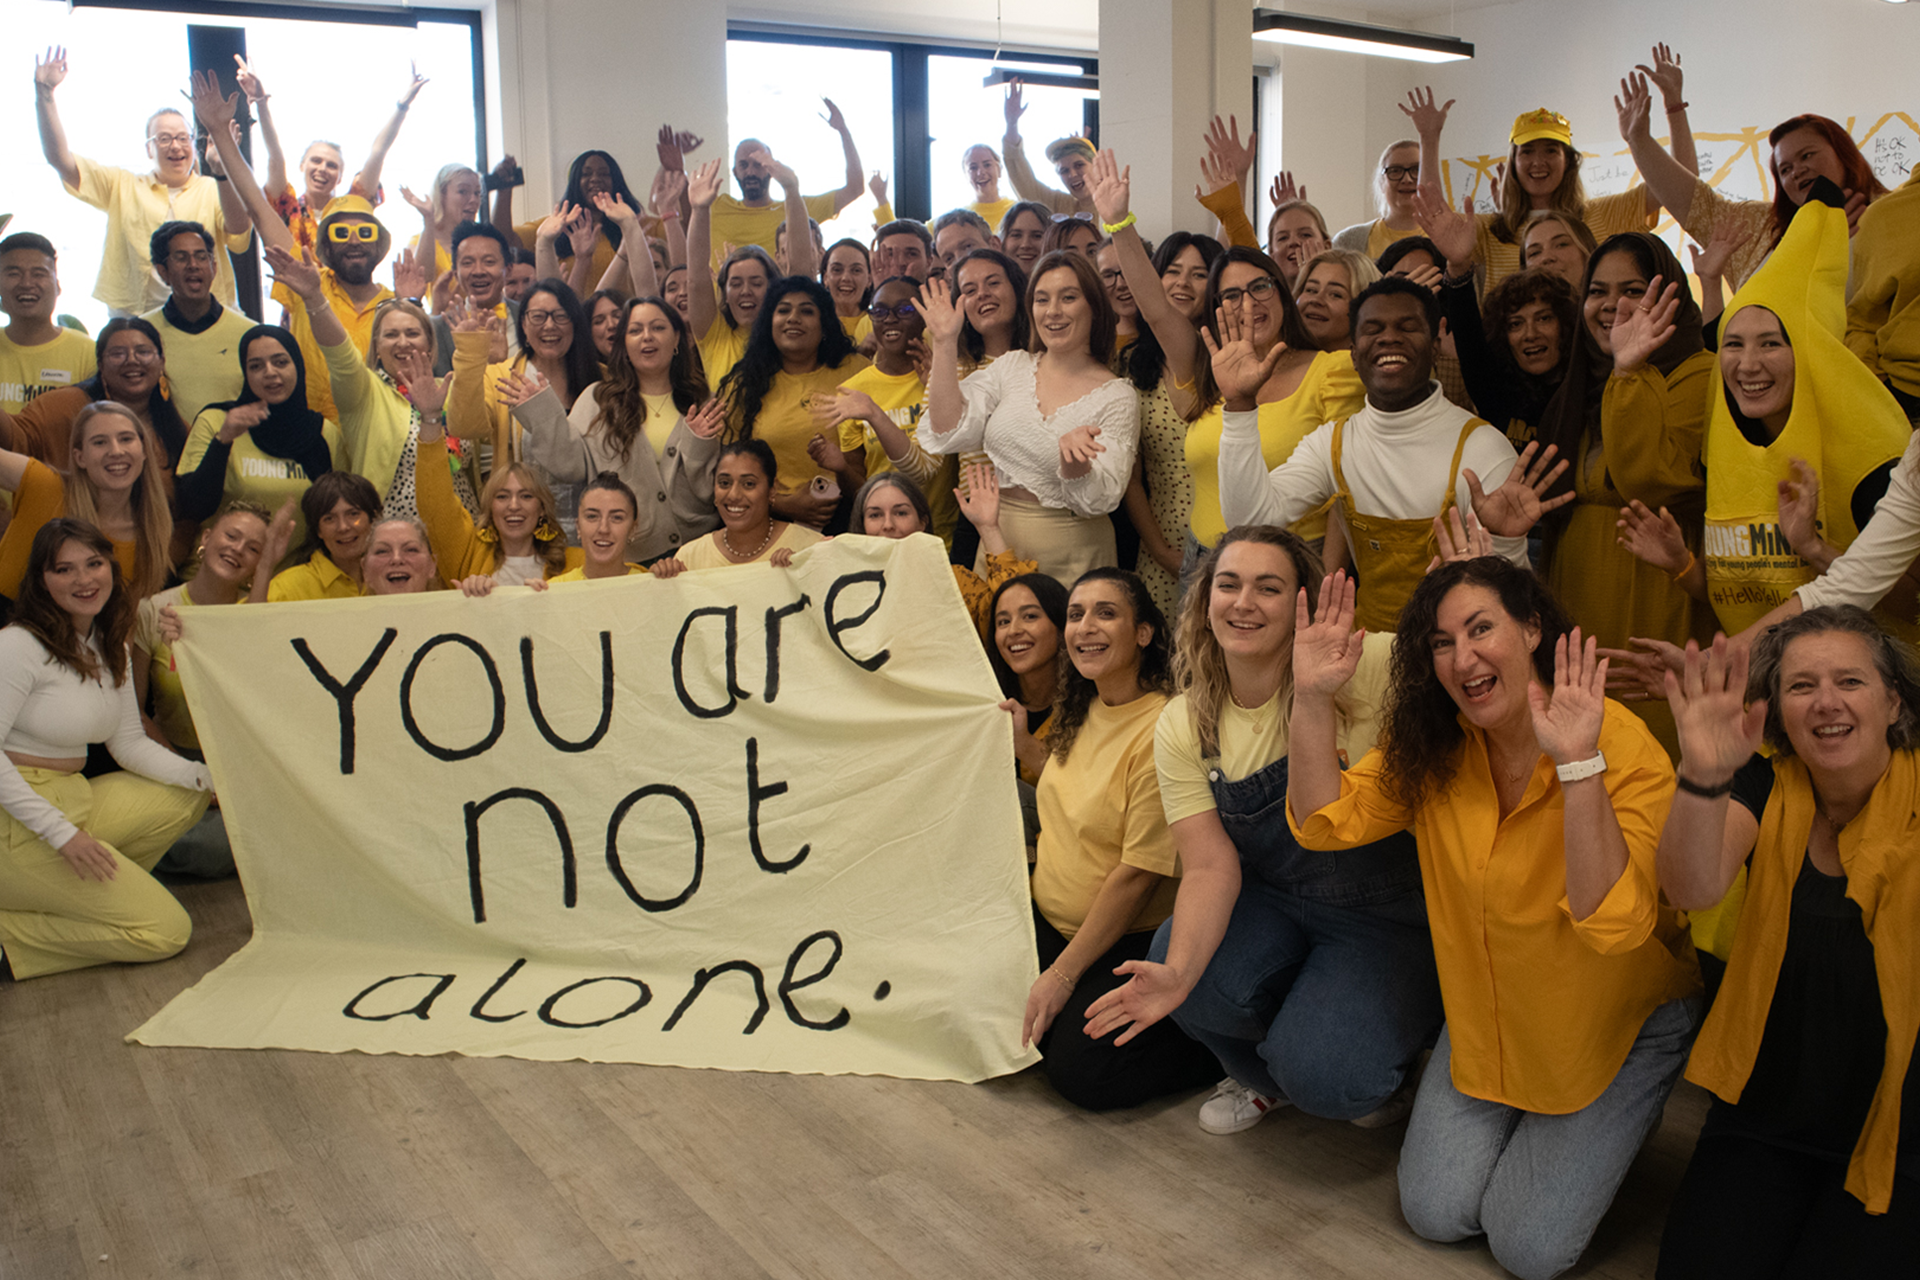 YoungMinds staff all wearing yellow for #HelloYellow 2023, posing with their hands in the air. They are holding a sign saying "You are not alone."